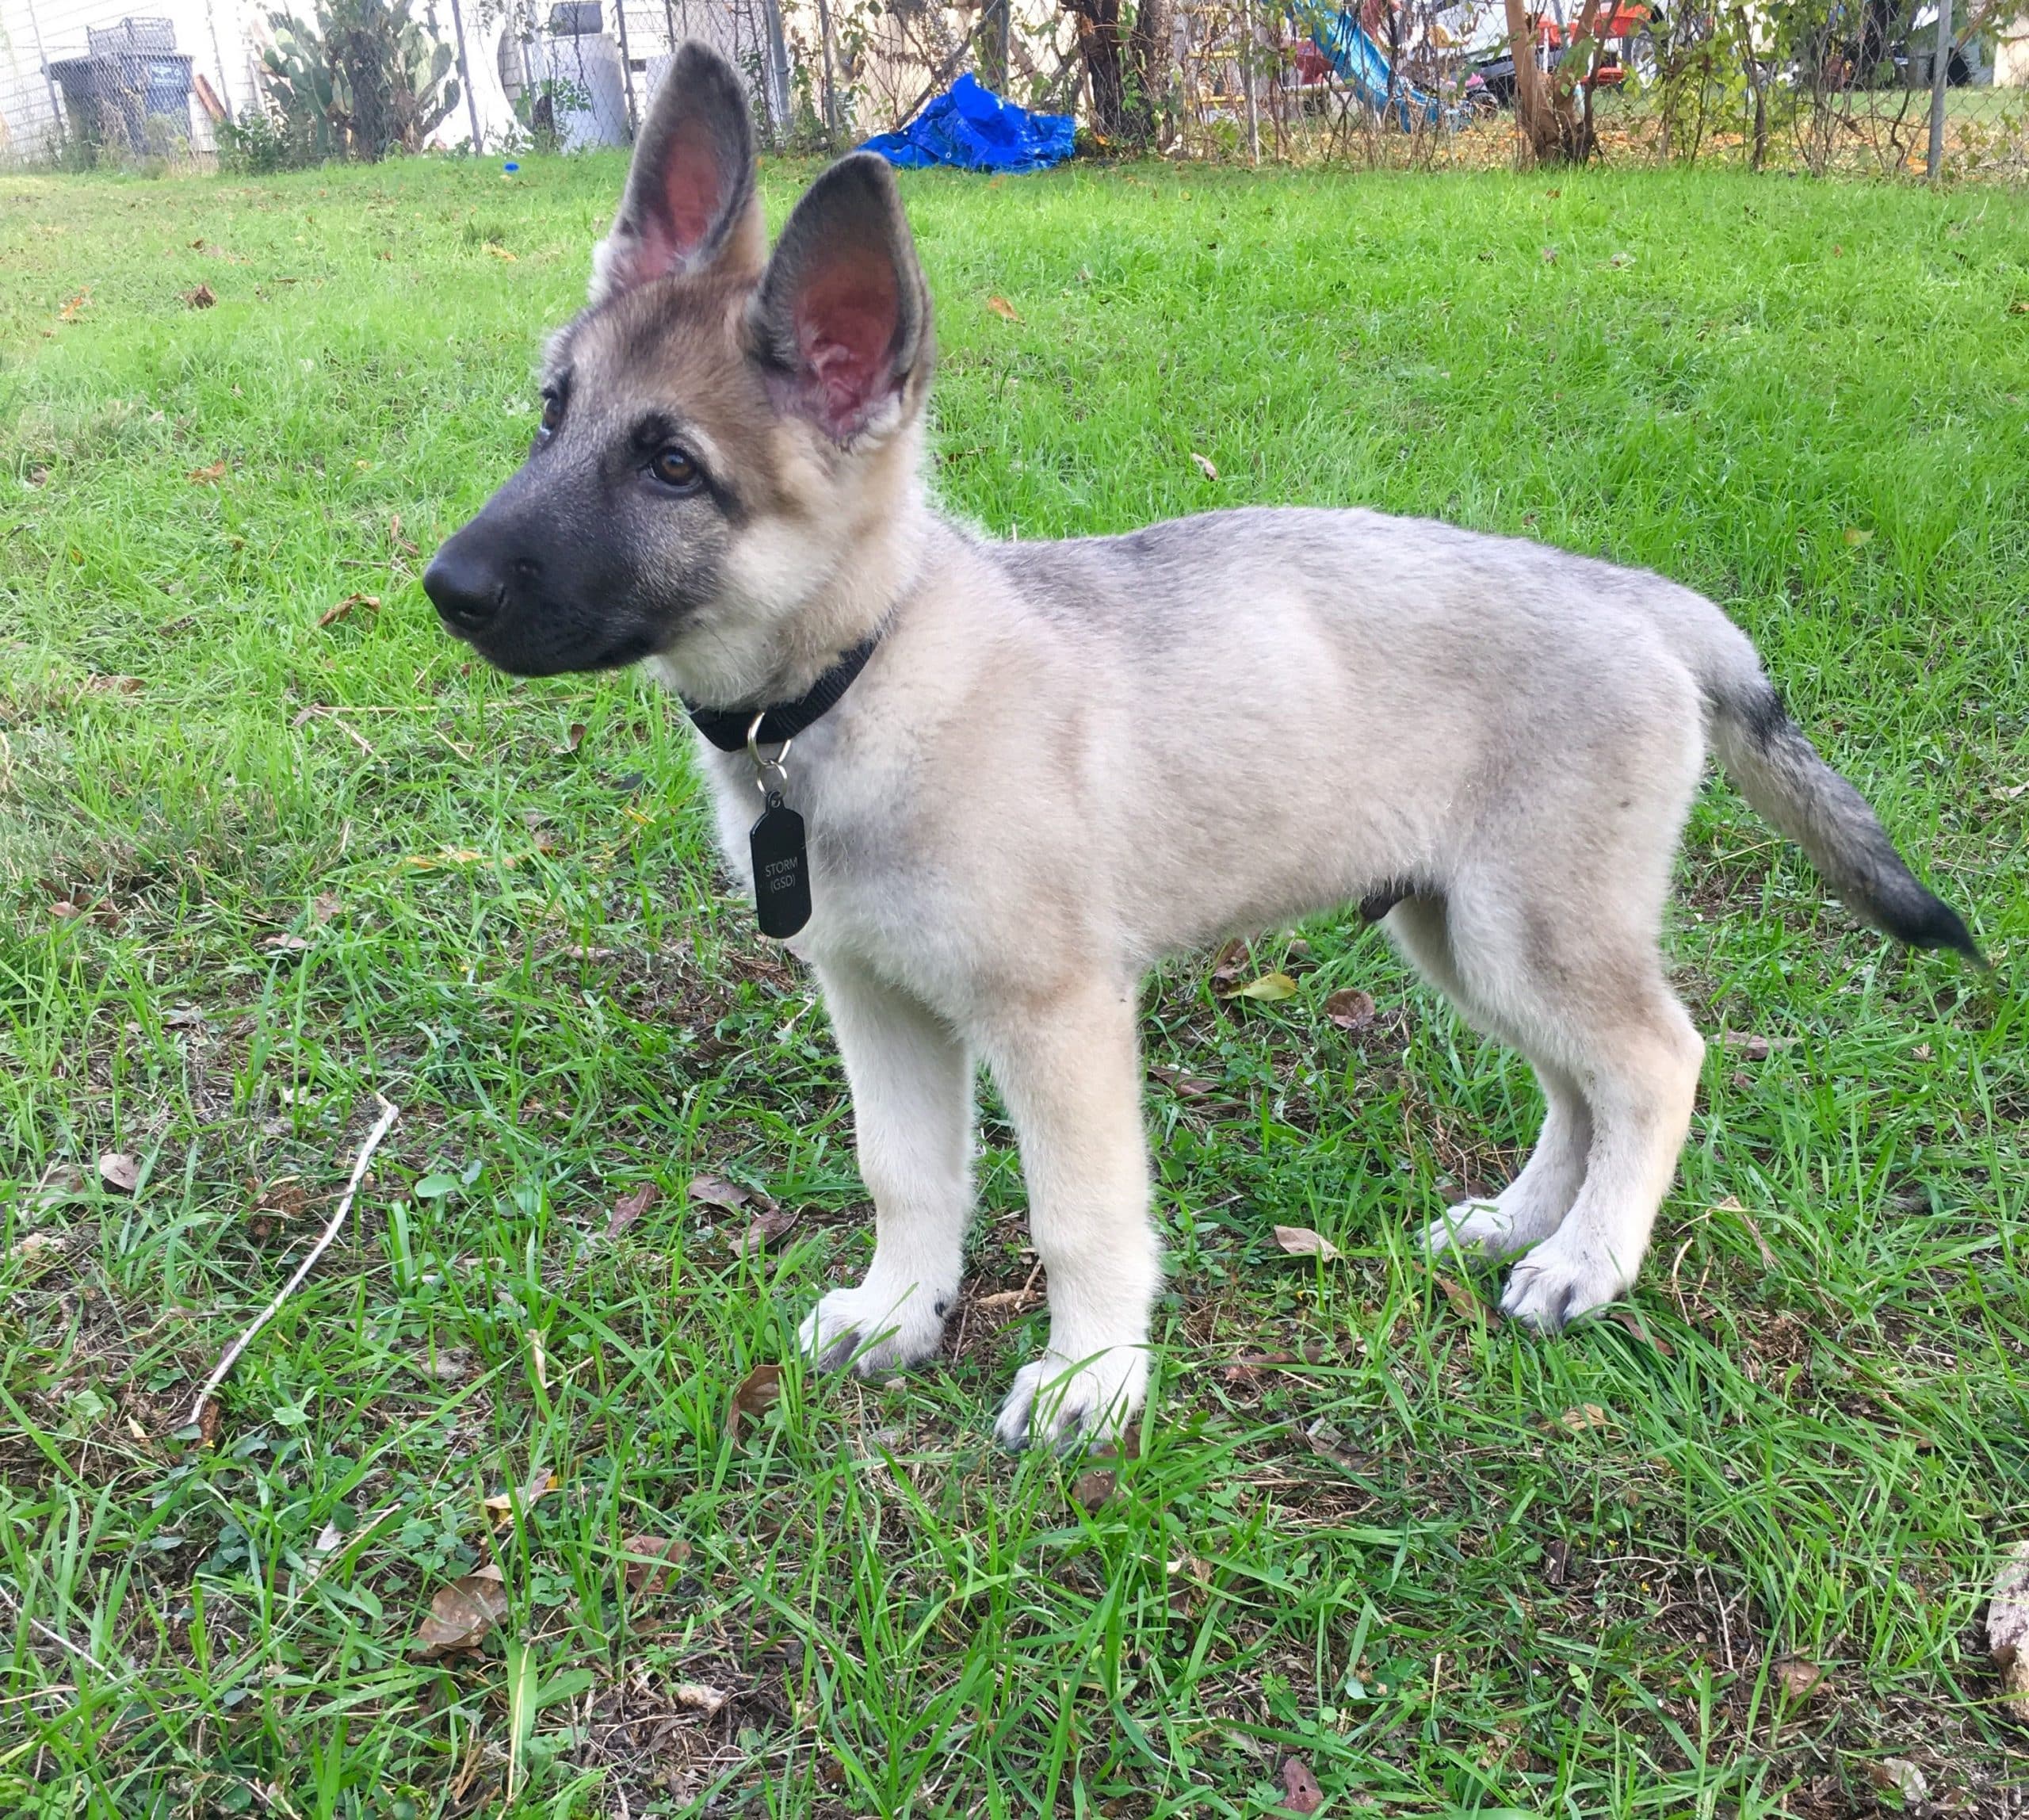 Silver Sable Long Haired German Shepherd Puppies